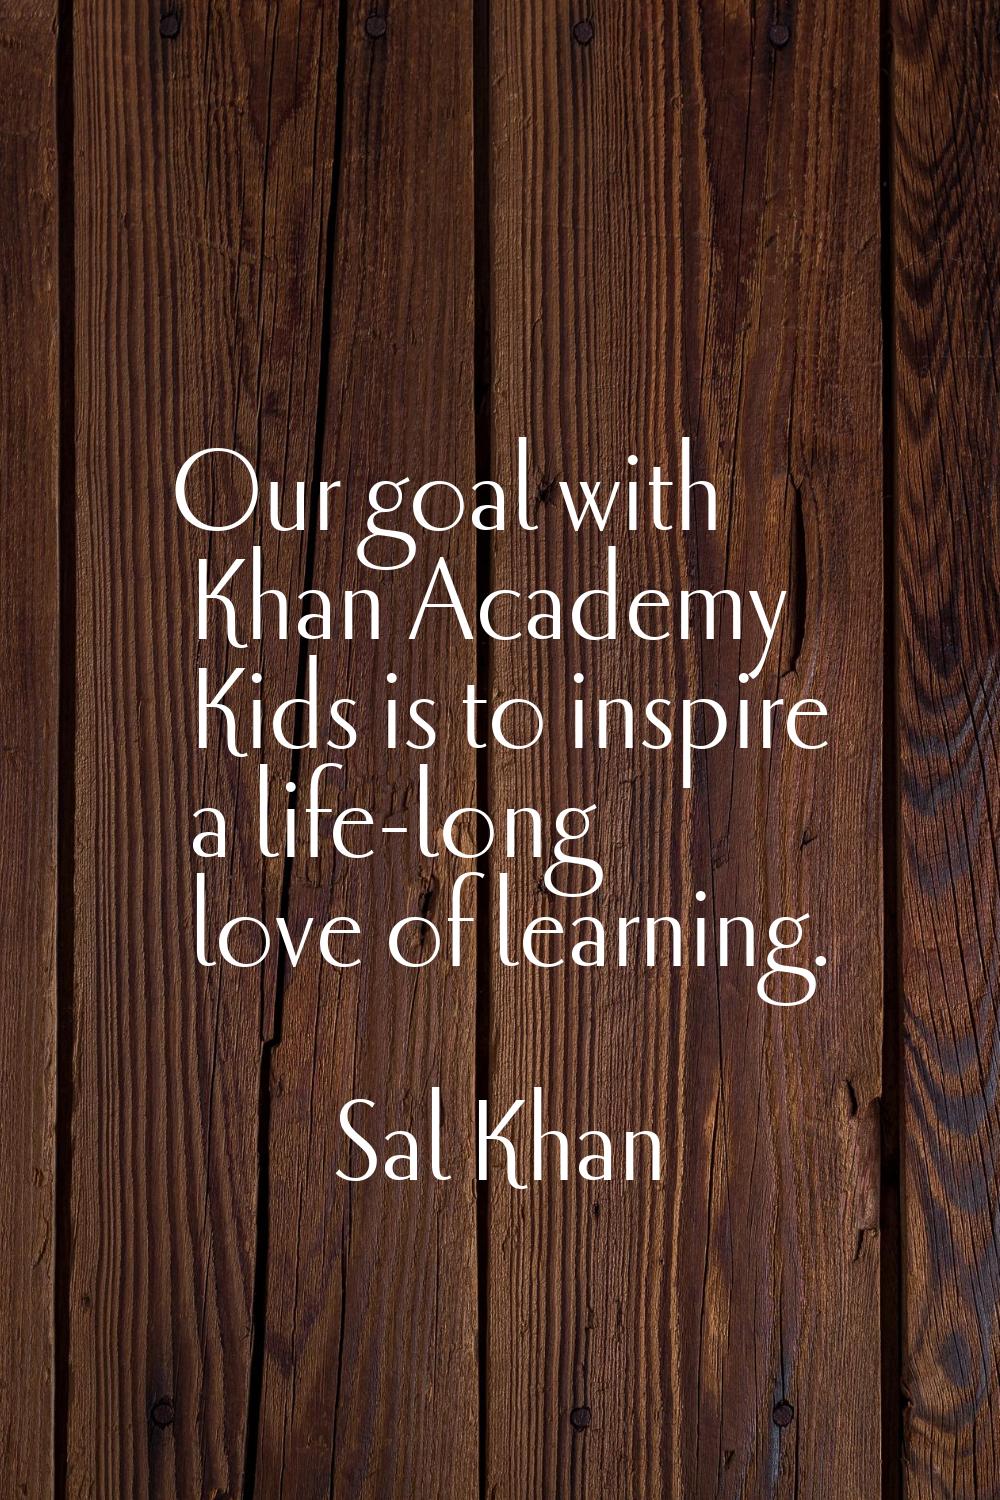 Our goal with Khan Academy Kids is to inspire a life-long love of learning.